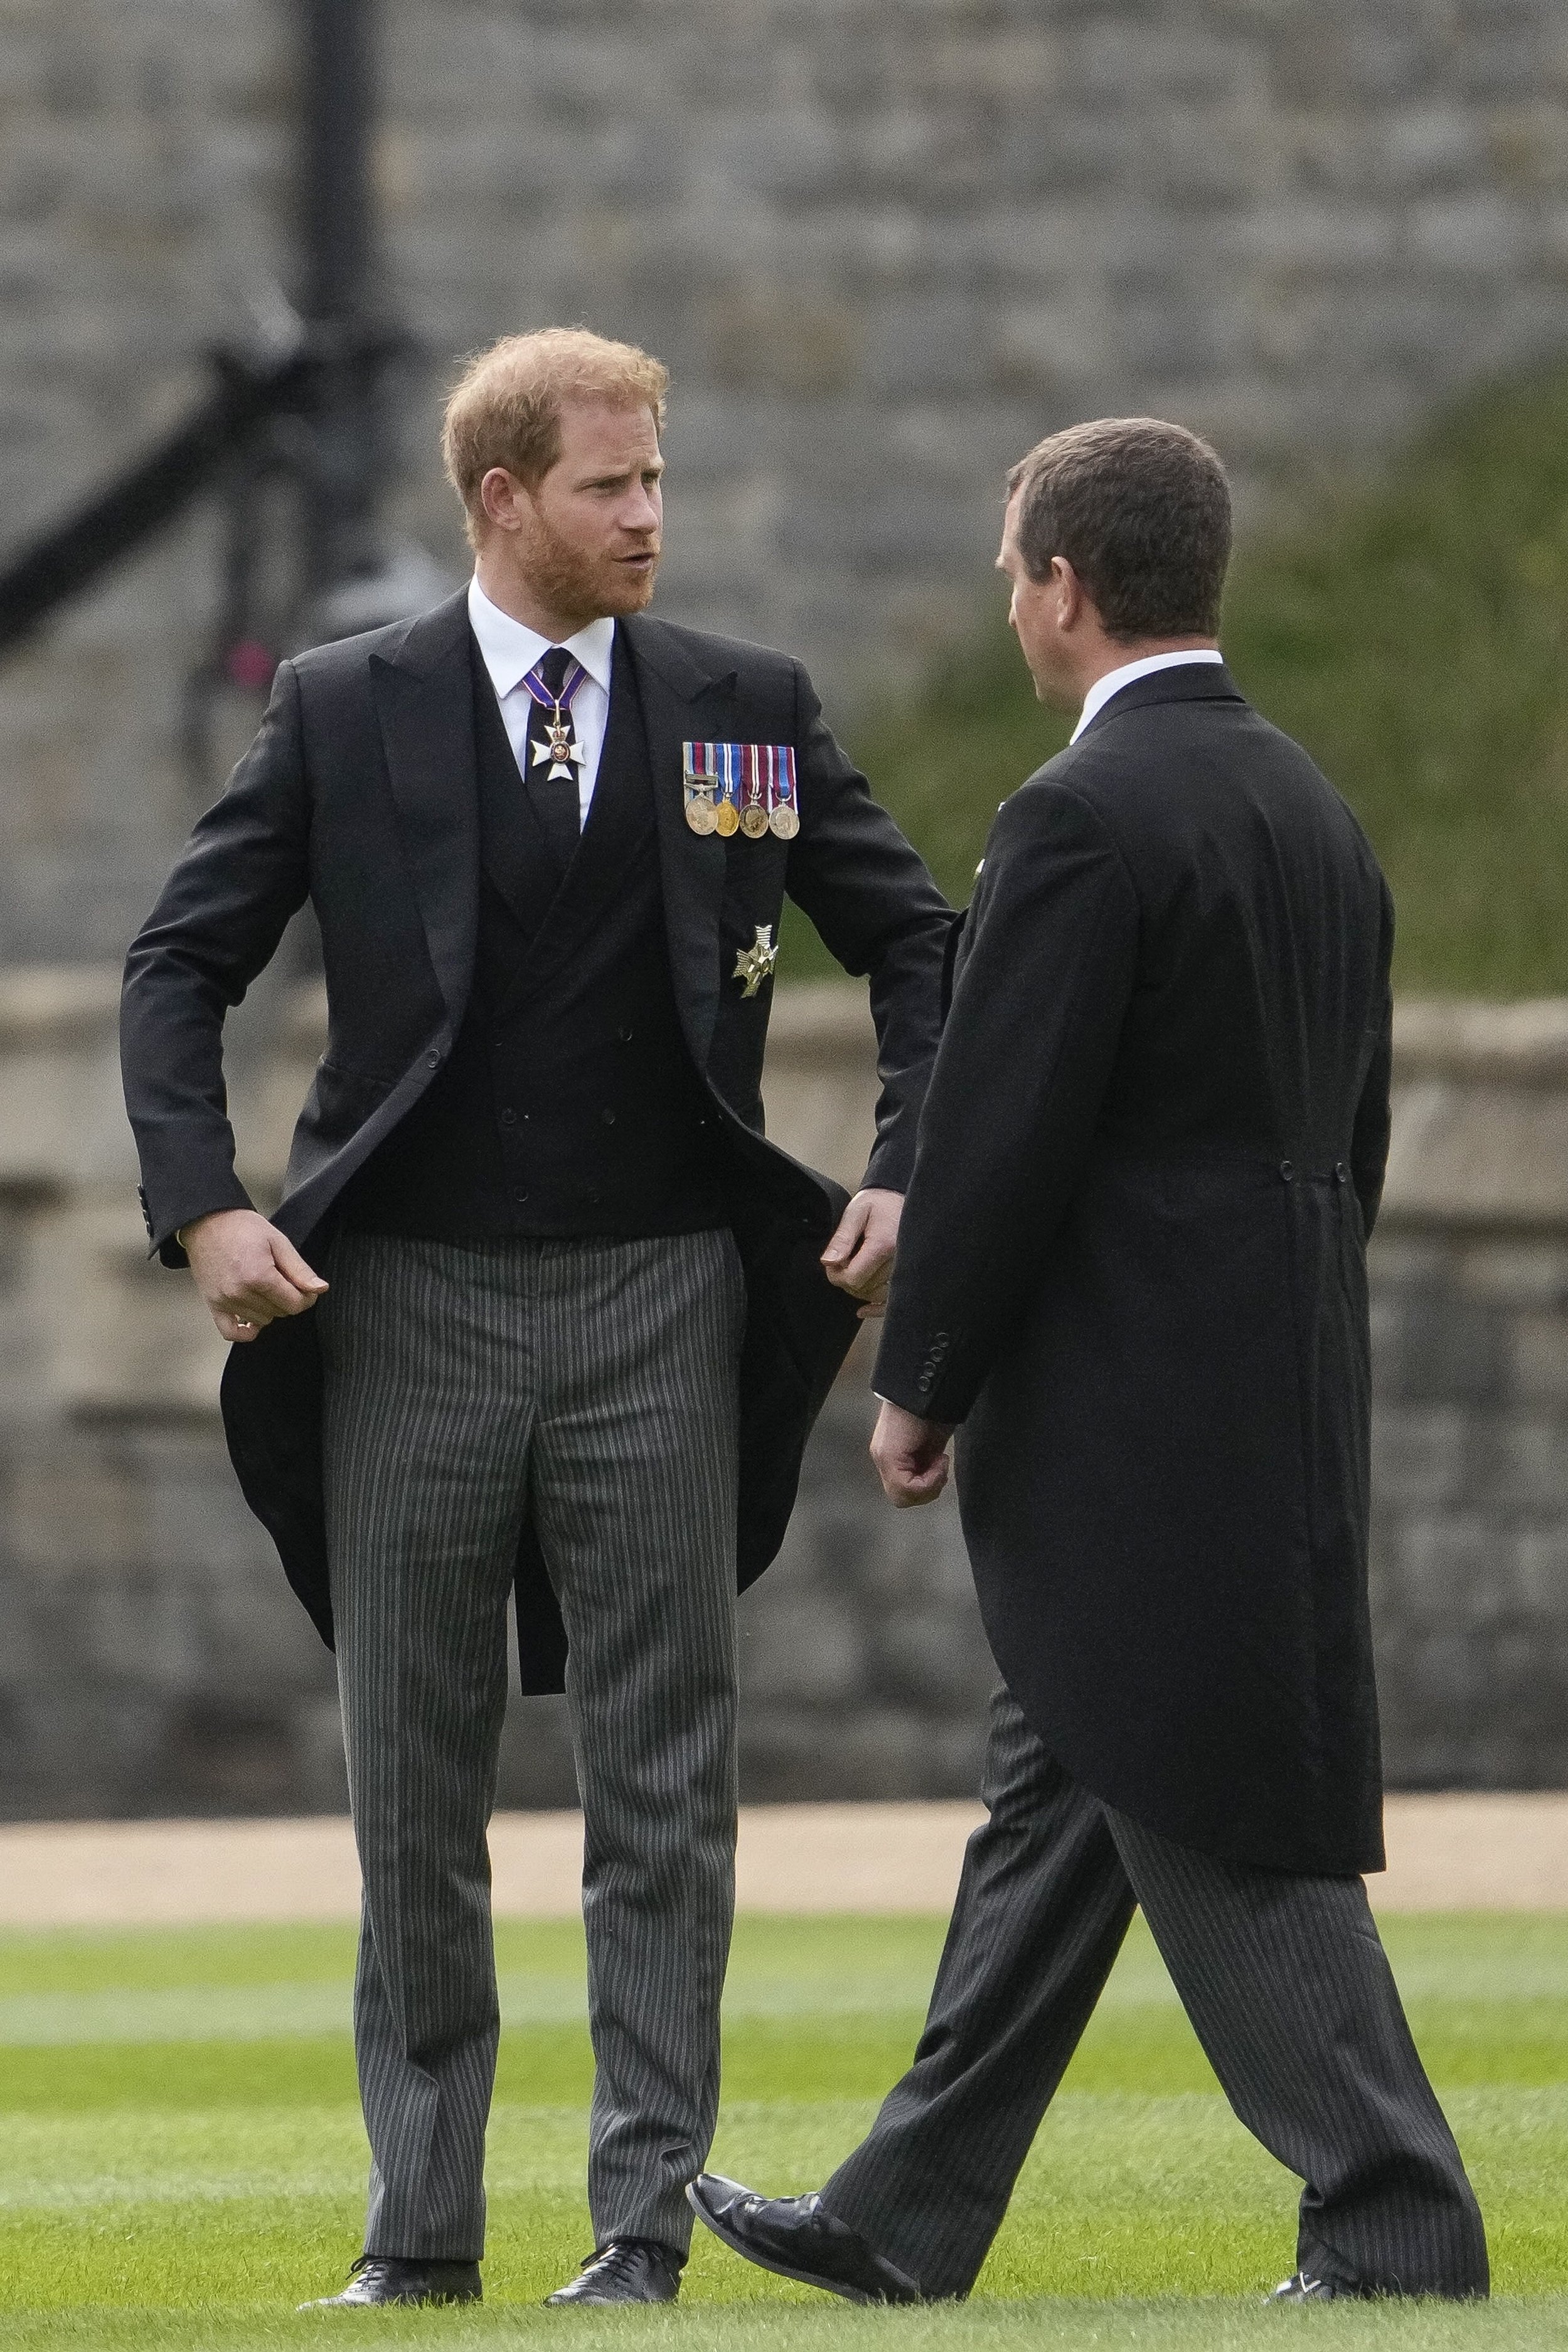 Prince Harry speaking with Peter Phillips as they arrive for the Queen Elizabeth II Committal Service at Windsor Castle on September 19, 2022, in Windsor, England | Source: Getty Images